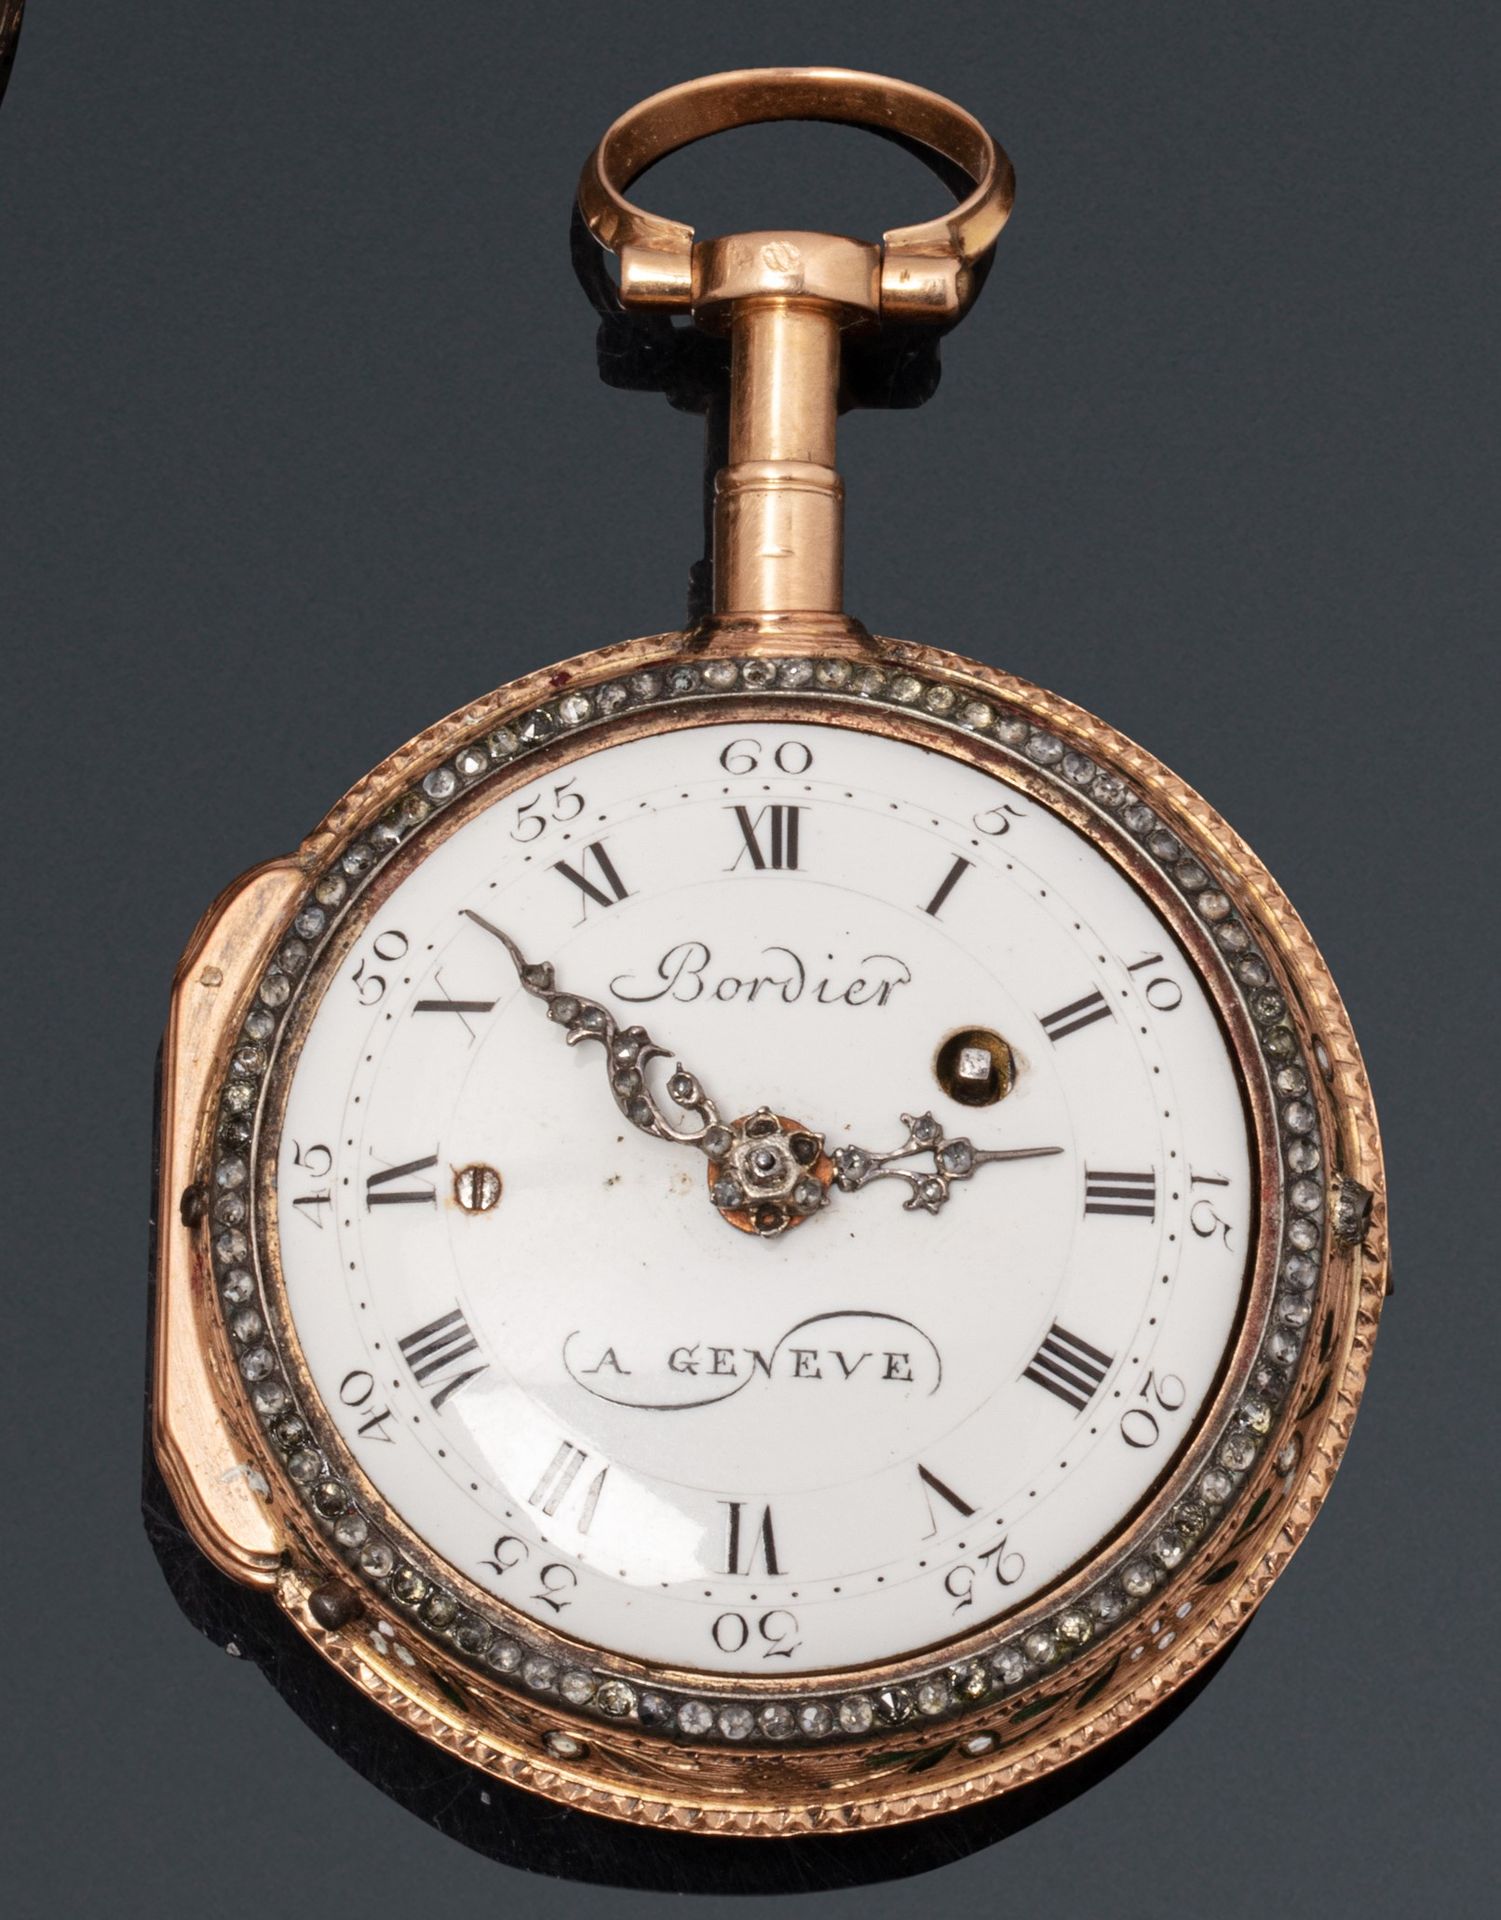 Null BORDIER in Geneva

Late 18th century.

Enamelled gold watch with striking. &hellip;